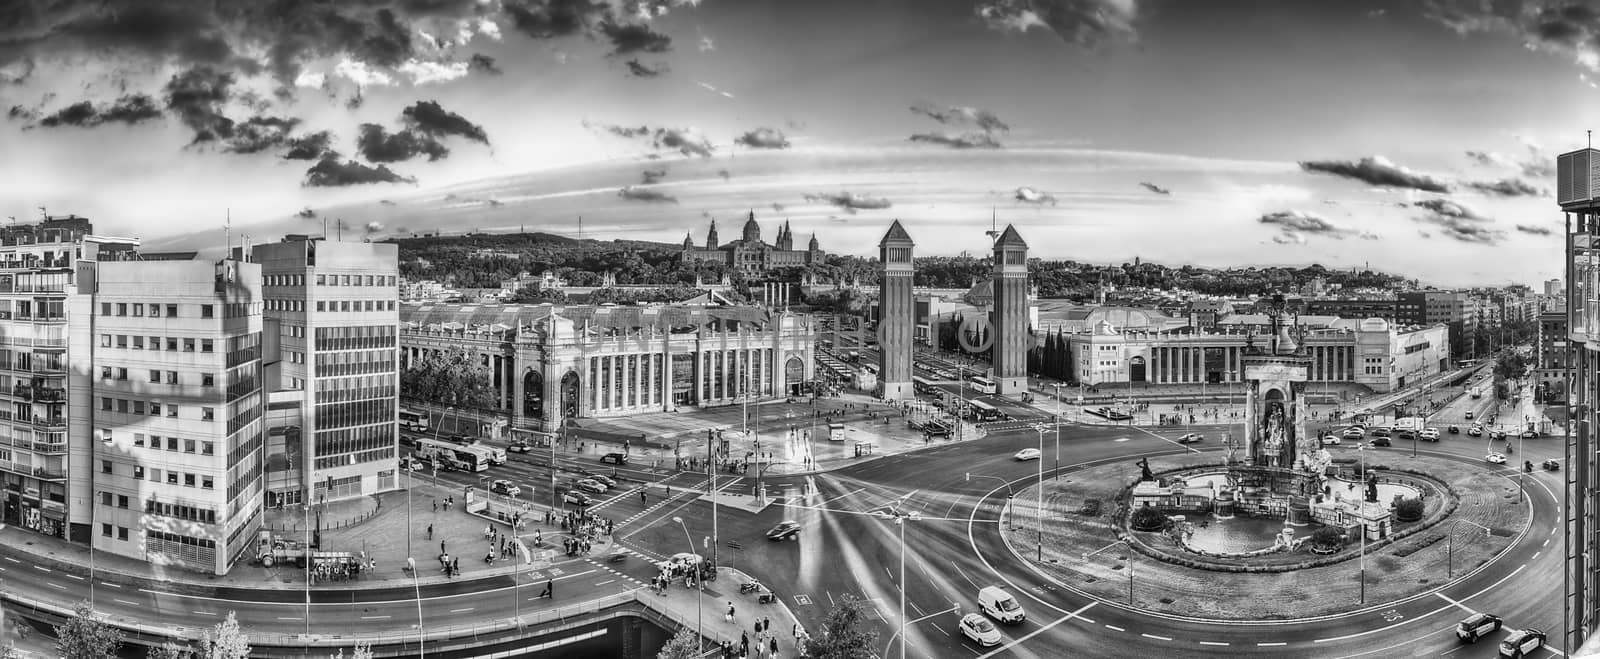 Panoramic view of Placa d'Espanya, towards Venetian Towers and National Art Museum. This iconic square is located at the foot of Montjuic and it's a major landmark in Barcelona, Catalonia, Spain